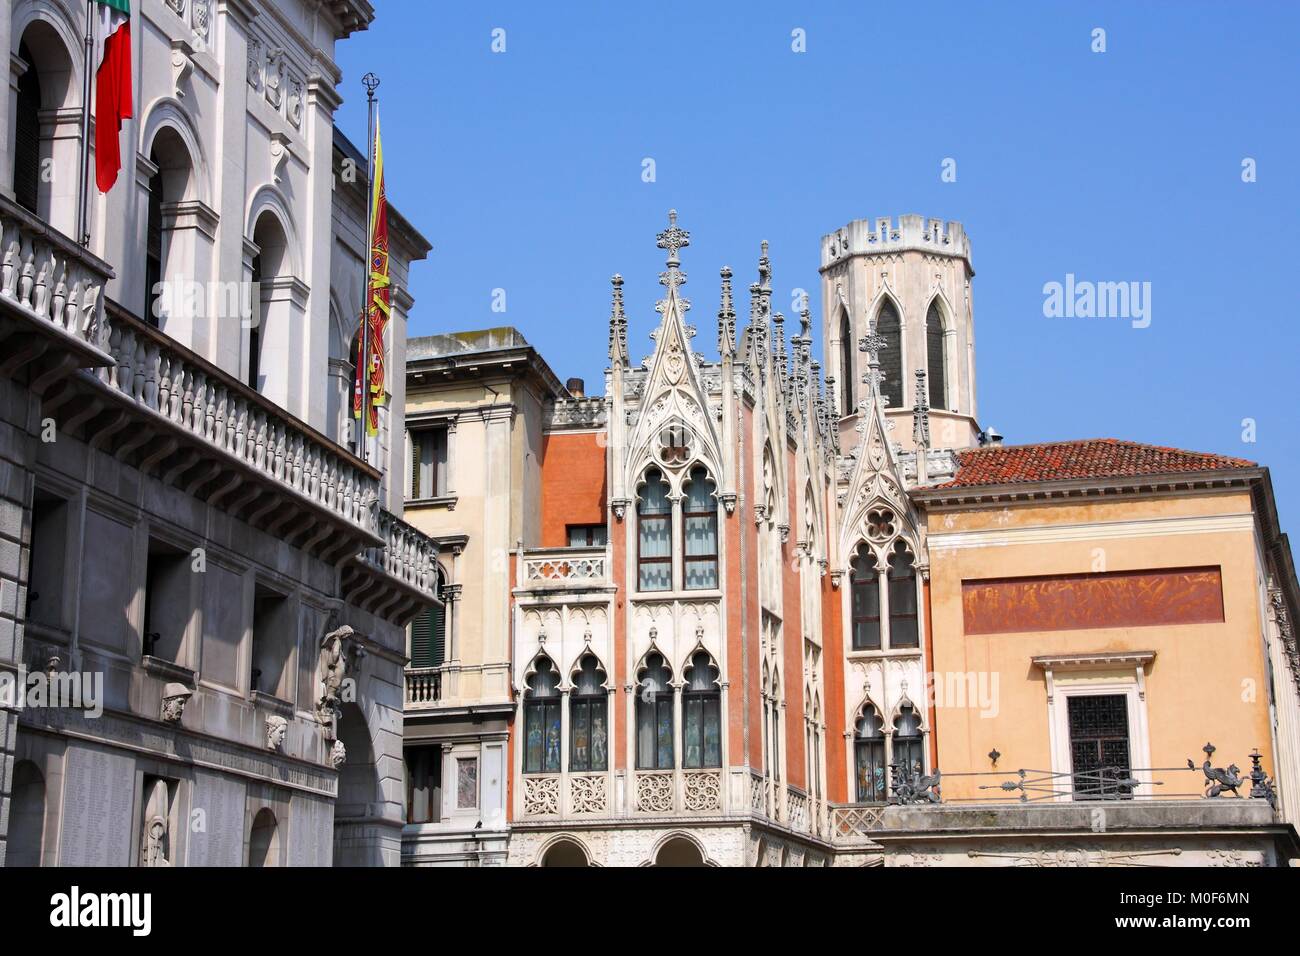 Famous landmark in Padua, Italy - Cafe Pedrocchi. Old architecture. Stock Photo